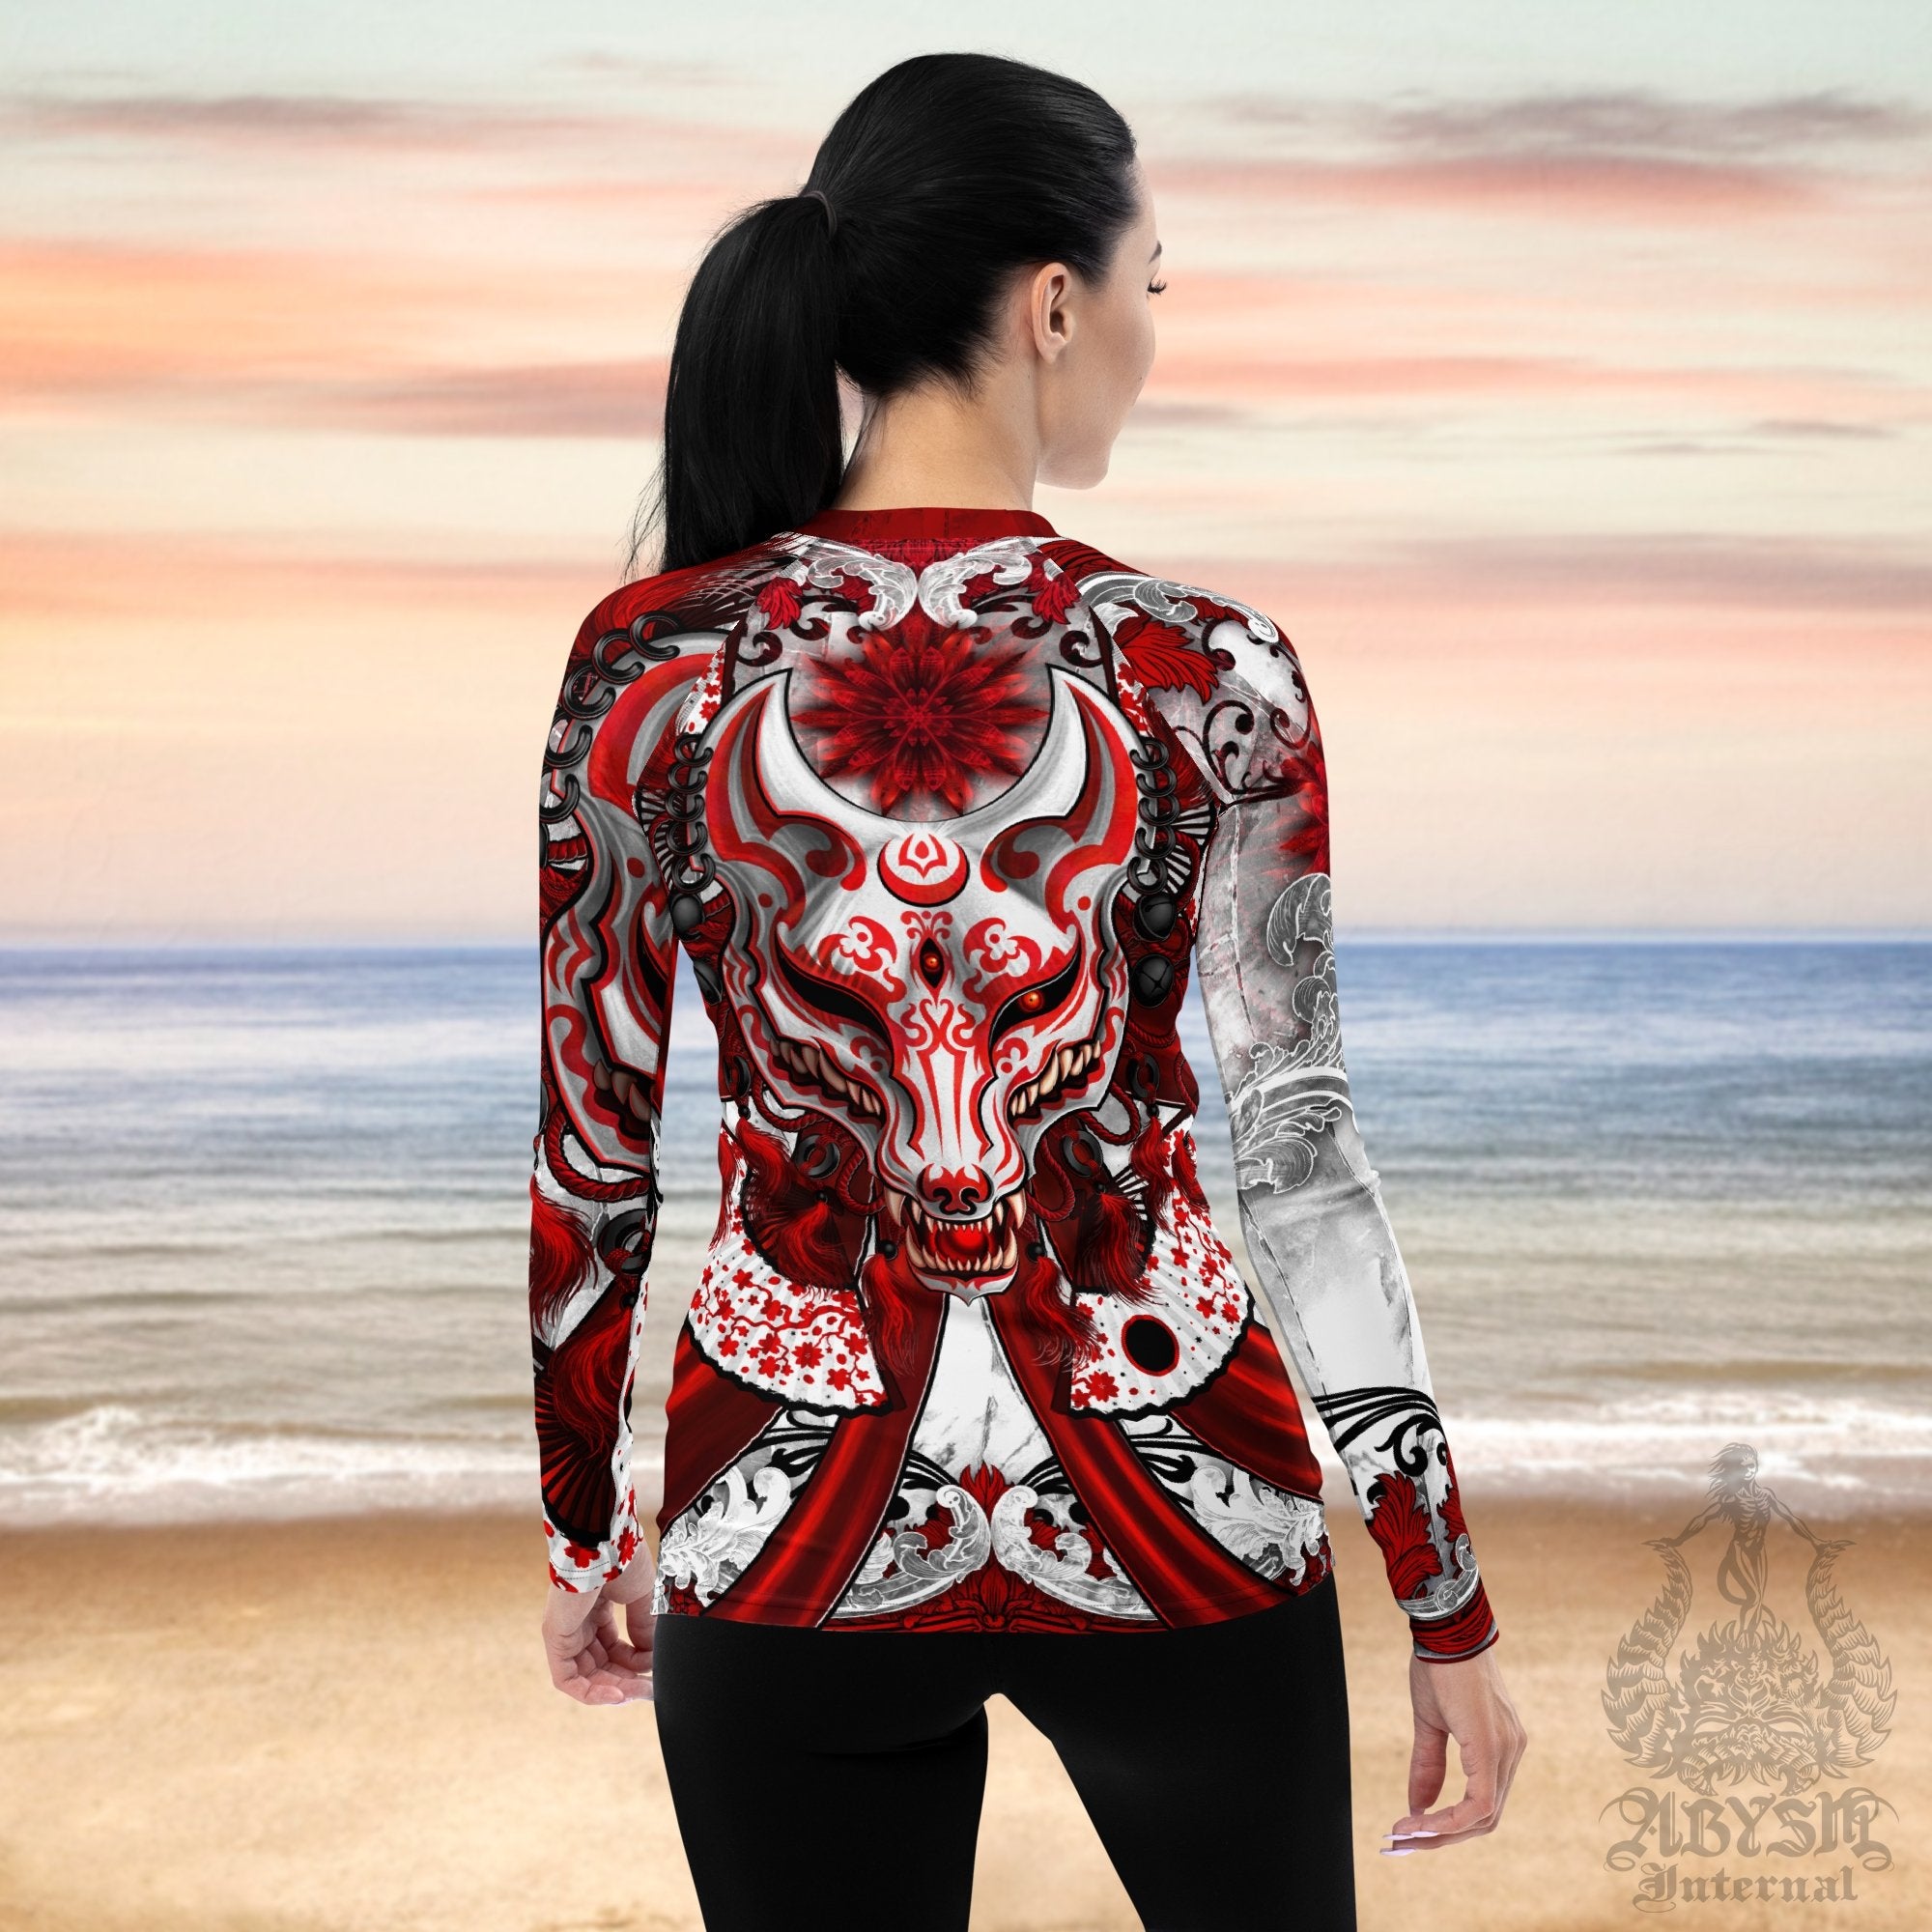 Awesome Women's Rash Guard, Long Sleeve spandex shirt for surfing, swimsuit top for water sports, Fantasy Art - Kitsune Bloody White Goth - Abysm Internal